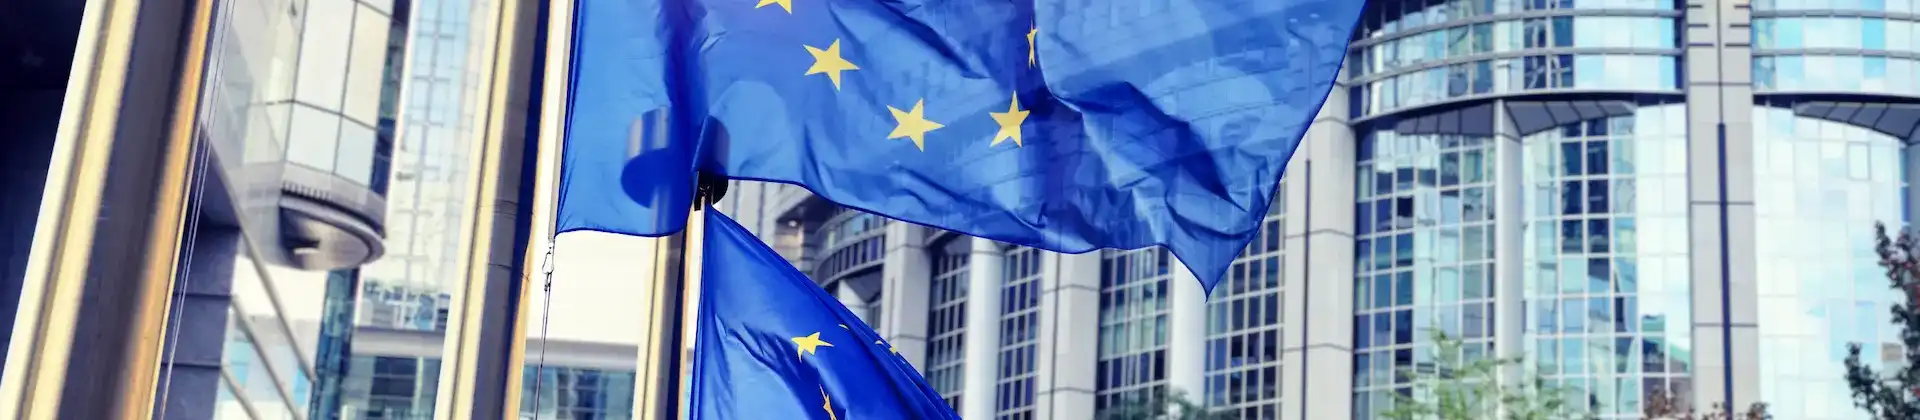 Why is the EU introducing a new system for travel authorization?